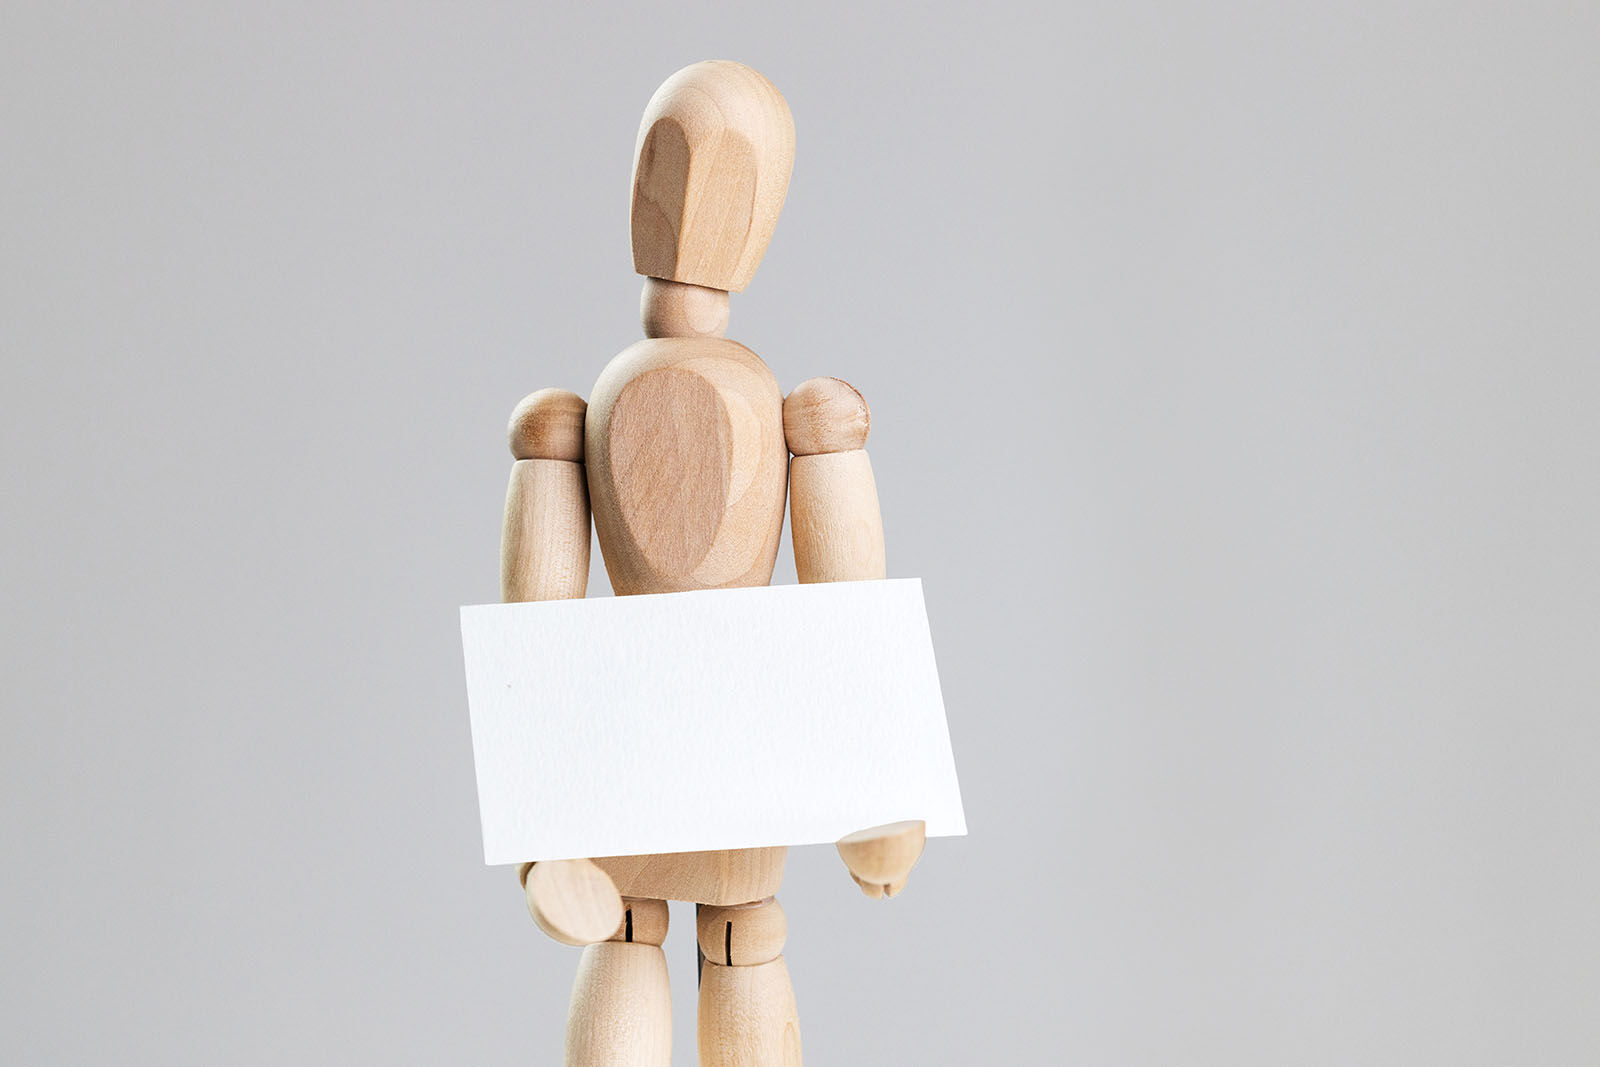 Business Card Held in Hands of a Wooden Manikin Mockup FREE PSD